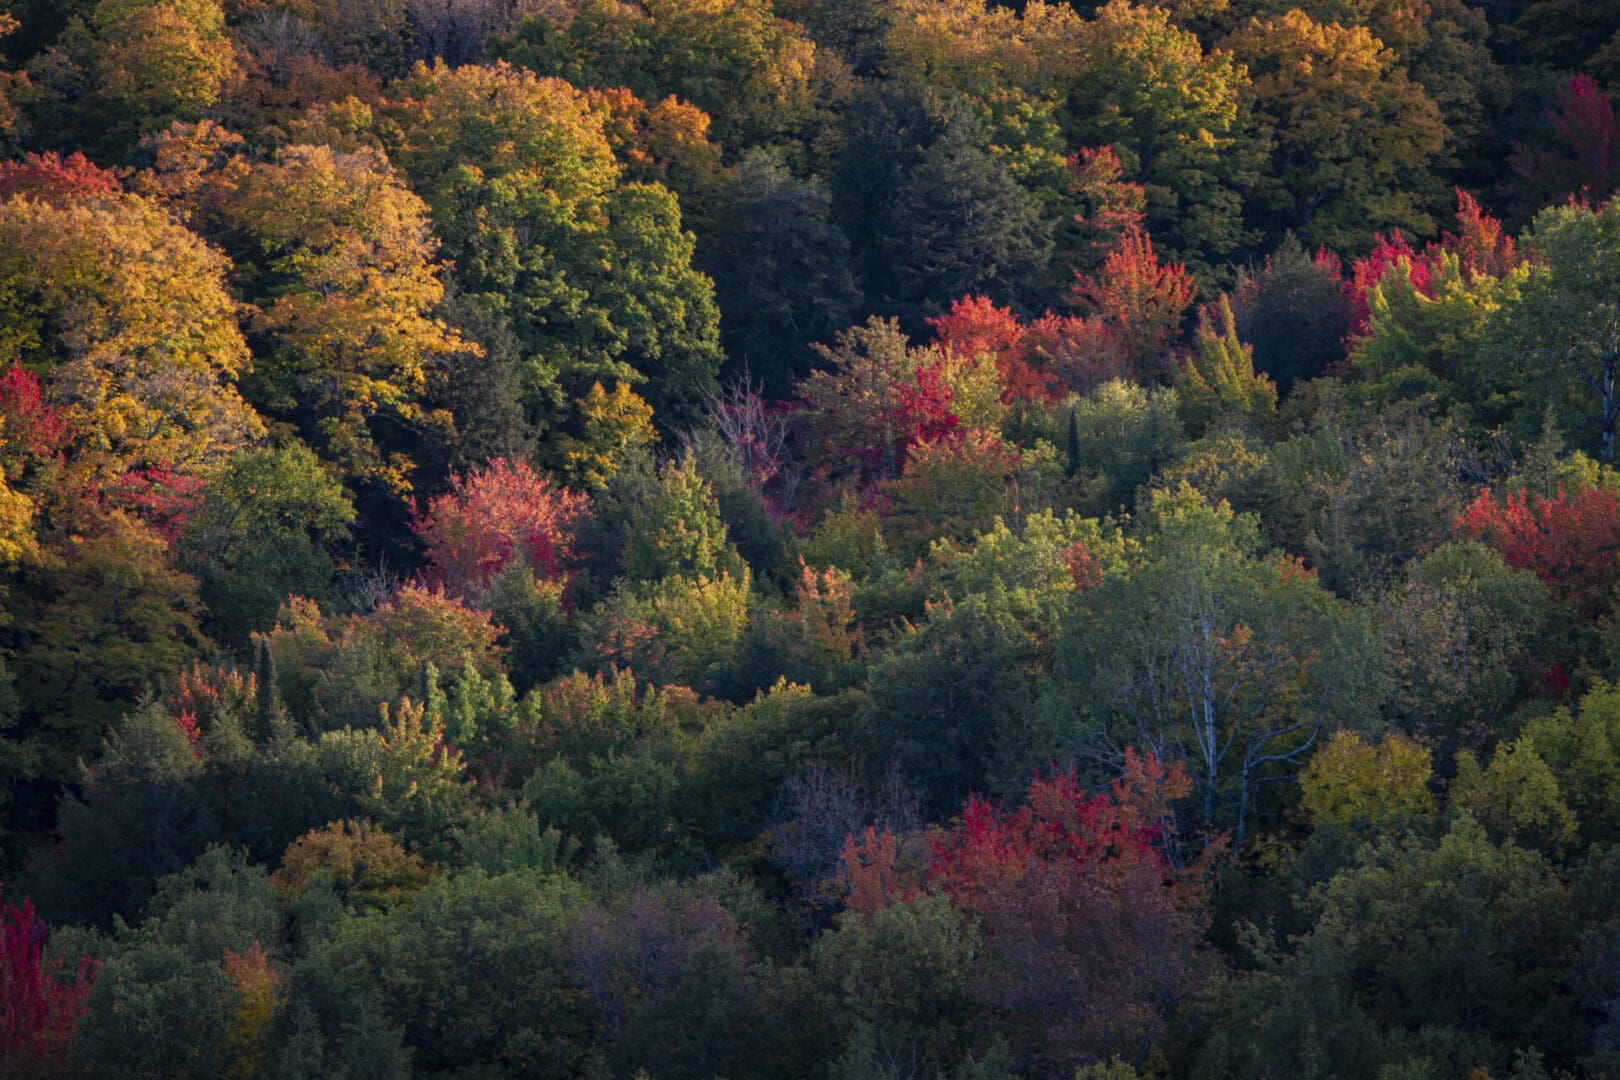 An aerial view of a forest full of colorful trees.